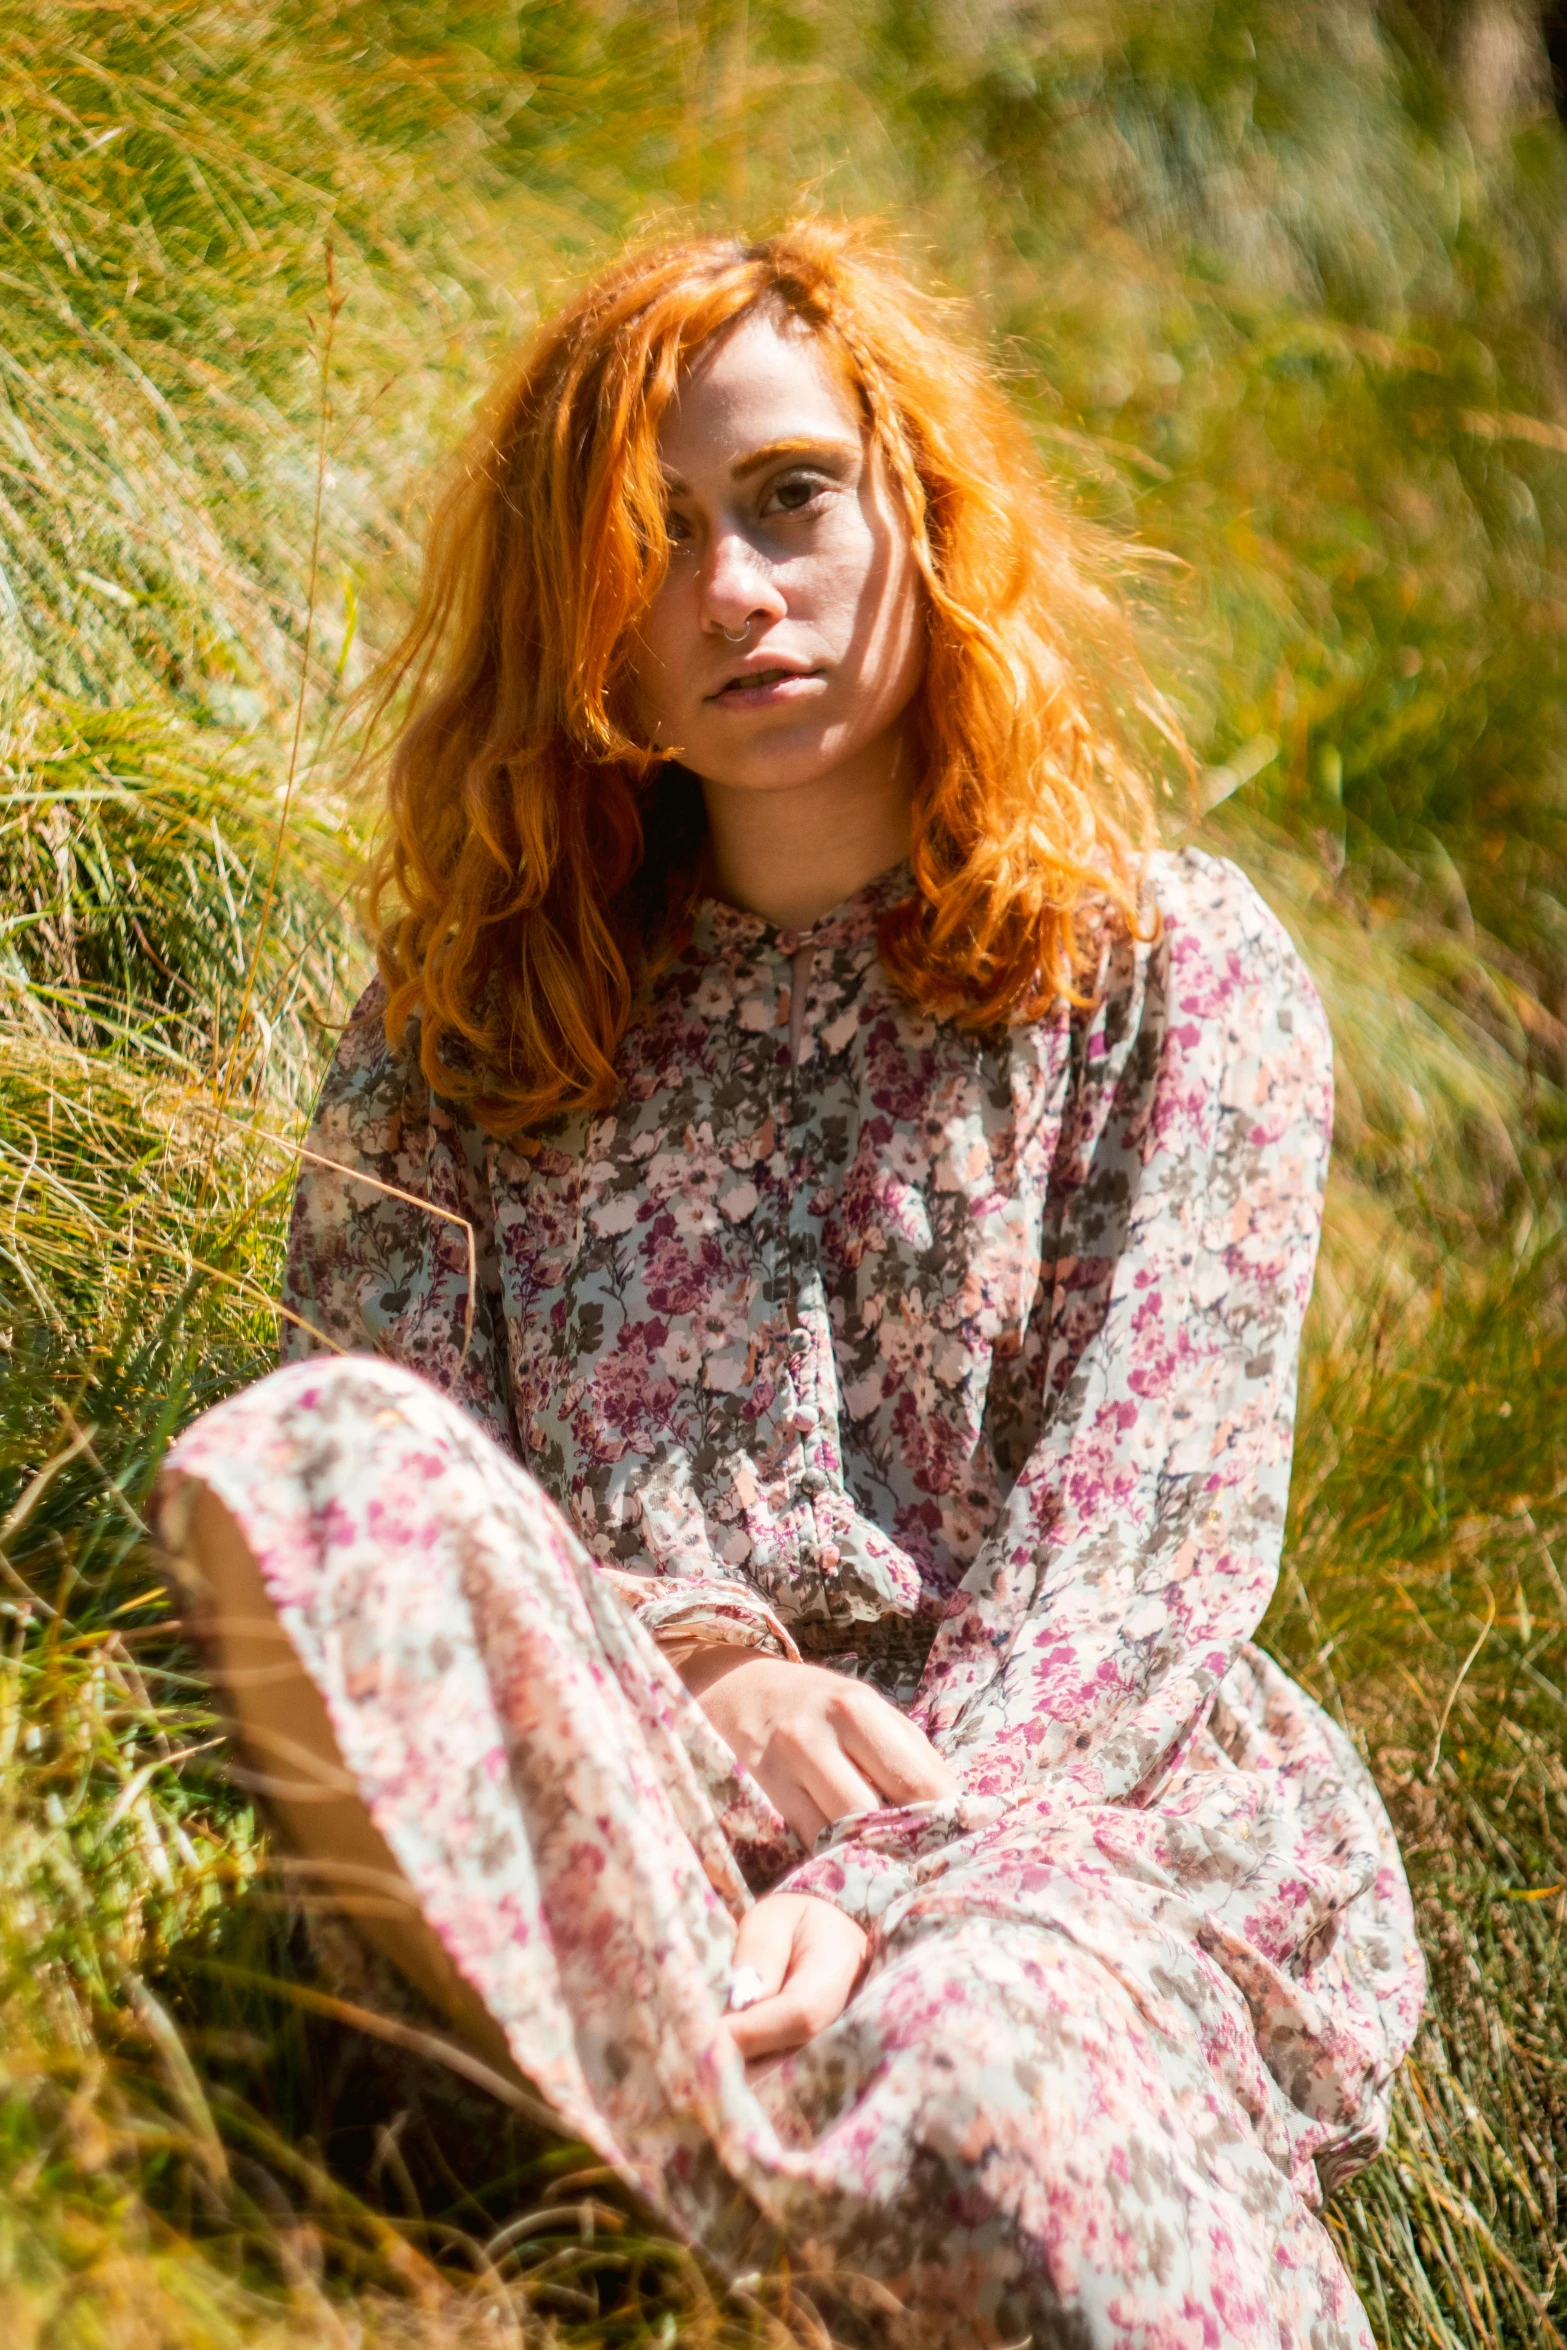 a young woman with orange hair sitting in grass